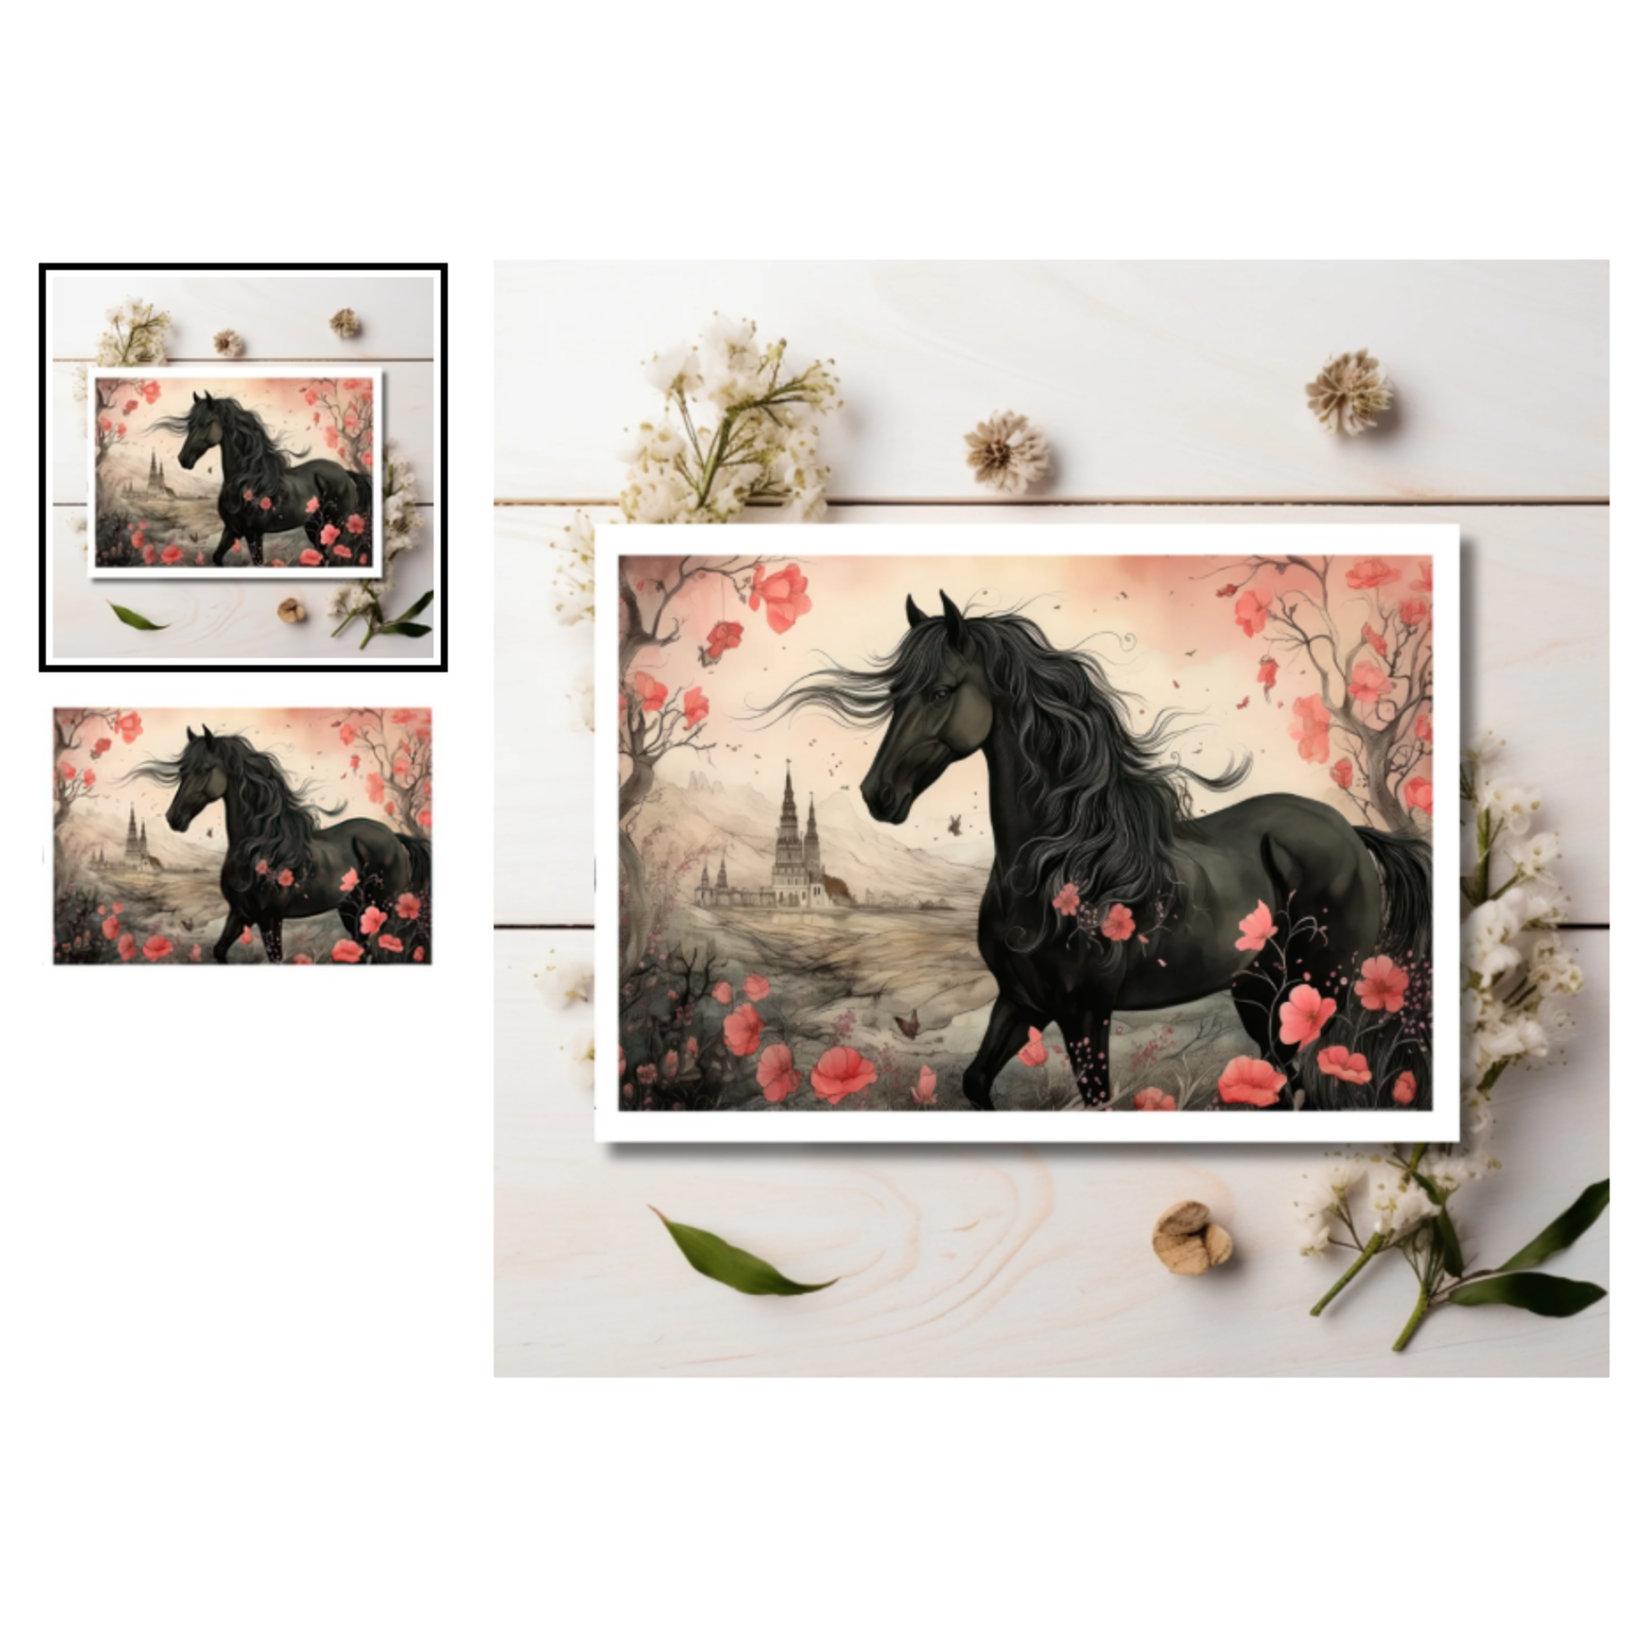 The Naughty Equestrian Ethereal Elegance : Vintage Inspired Black Horse Greeting Card